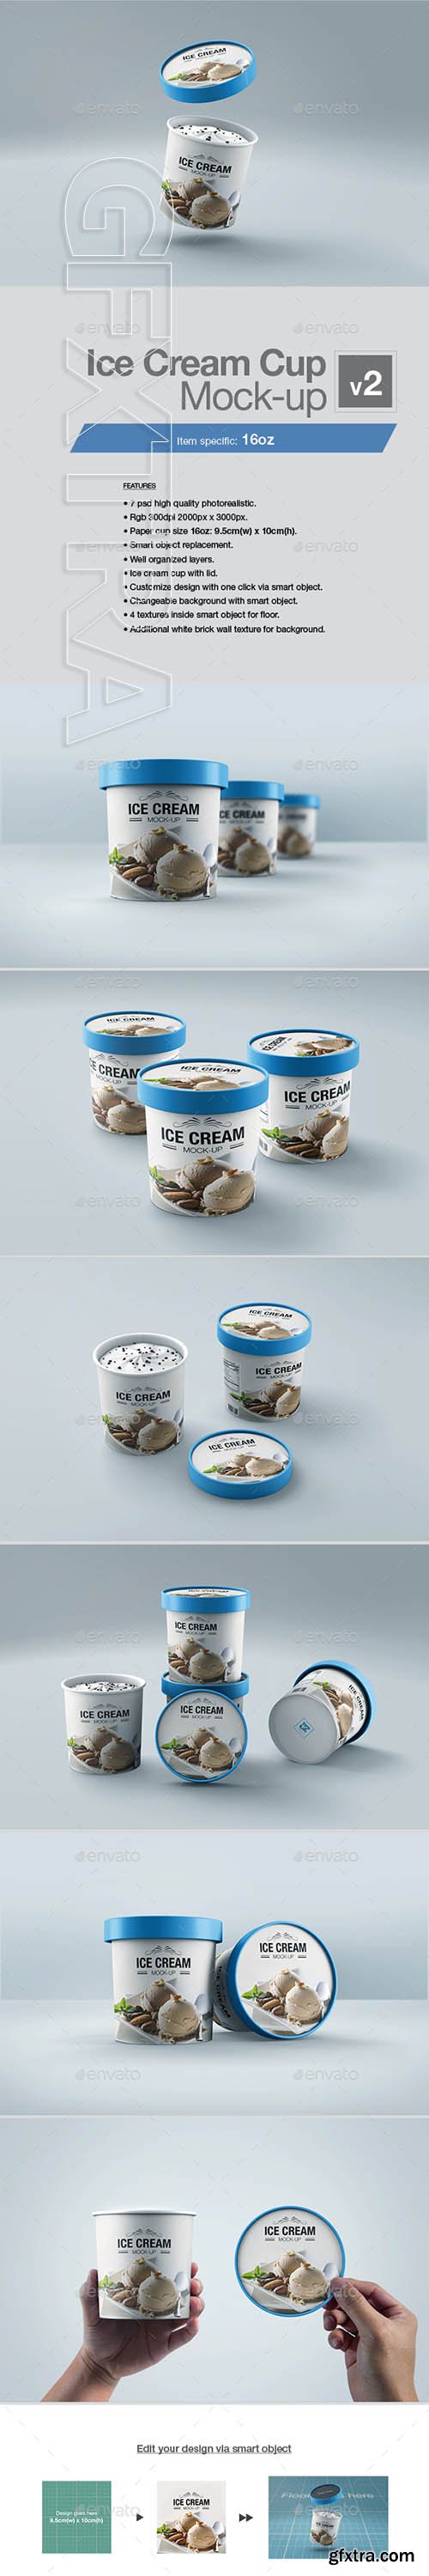 GraphicRiver - Ice Cream Cup Mock-up v2 22645755